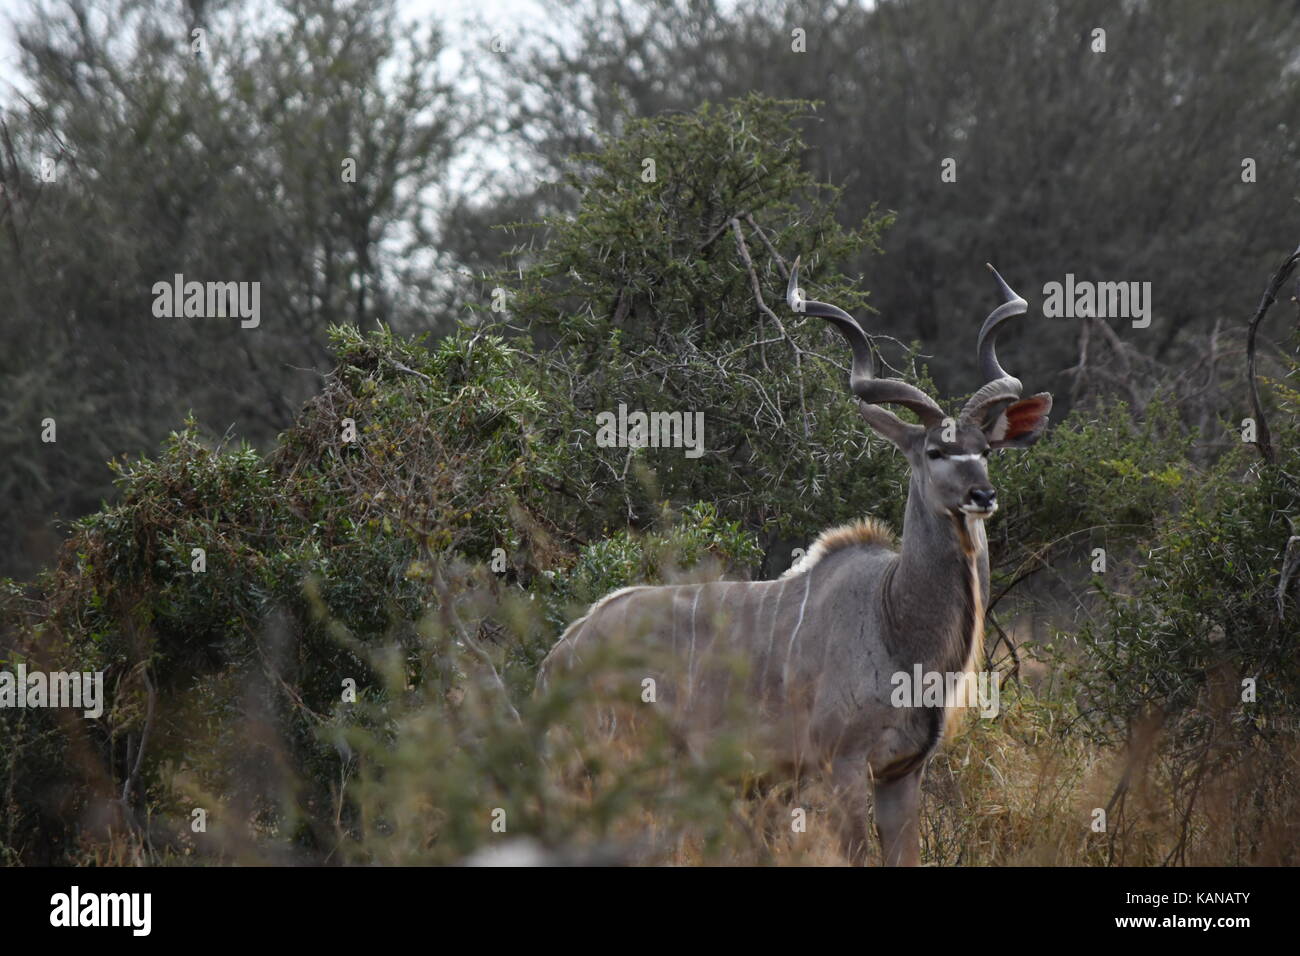 Kudu Bull emerges from the bush in Kruger National Park, South Africa Stock Photo